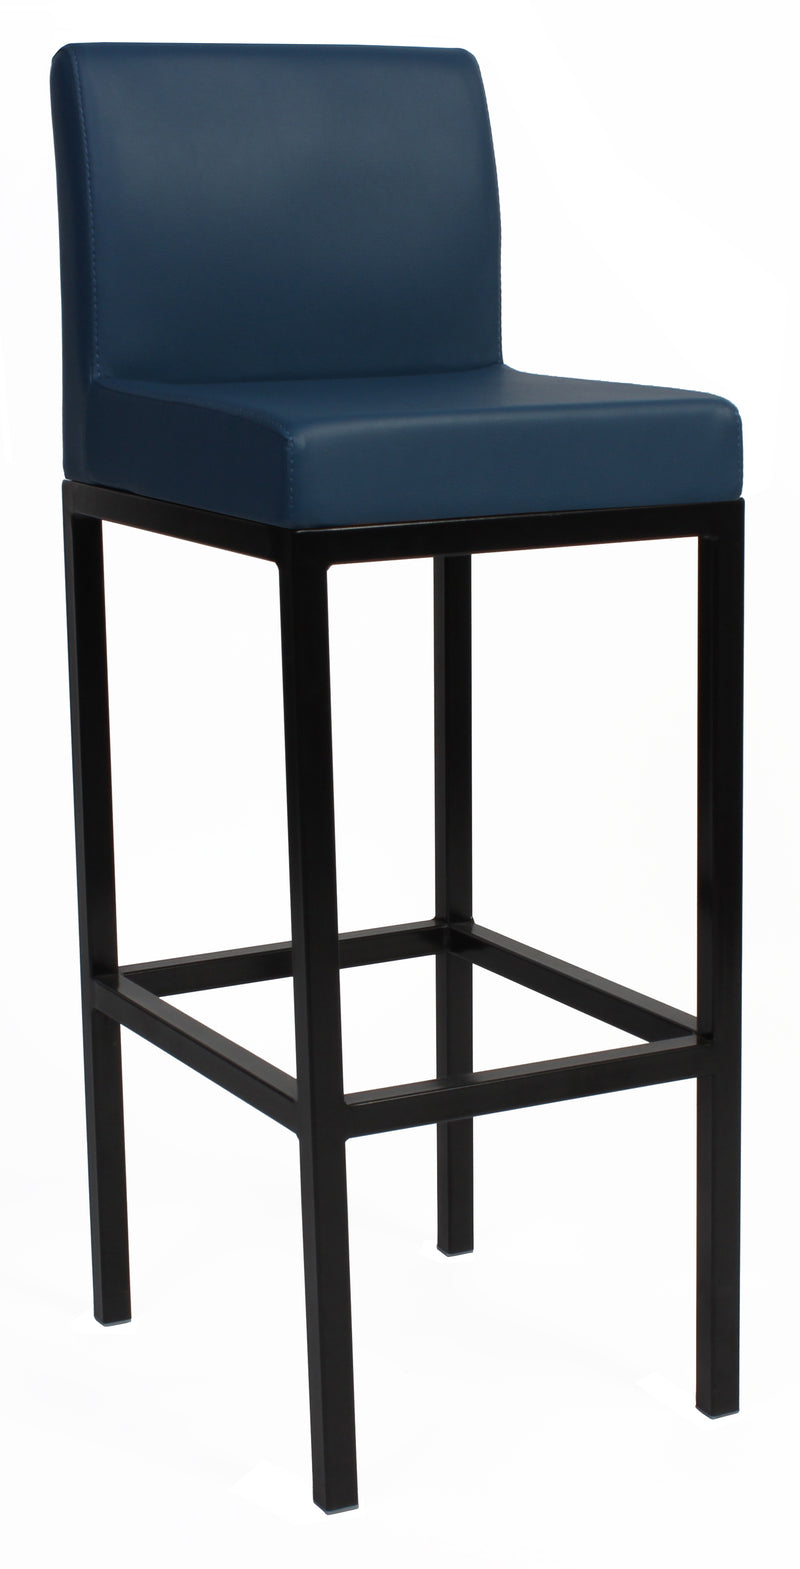 2x York Stools, Stools - Sketch Commercial Hospitality Furniture